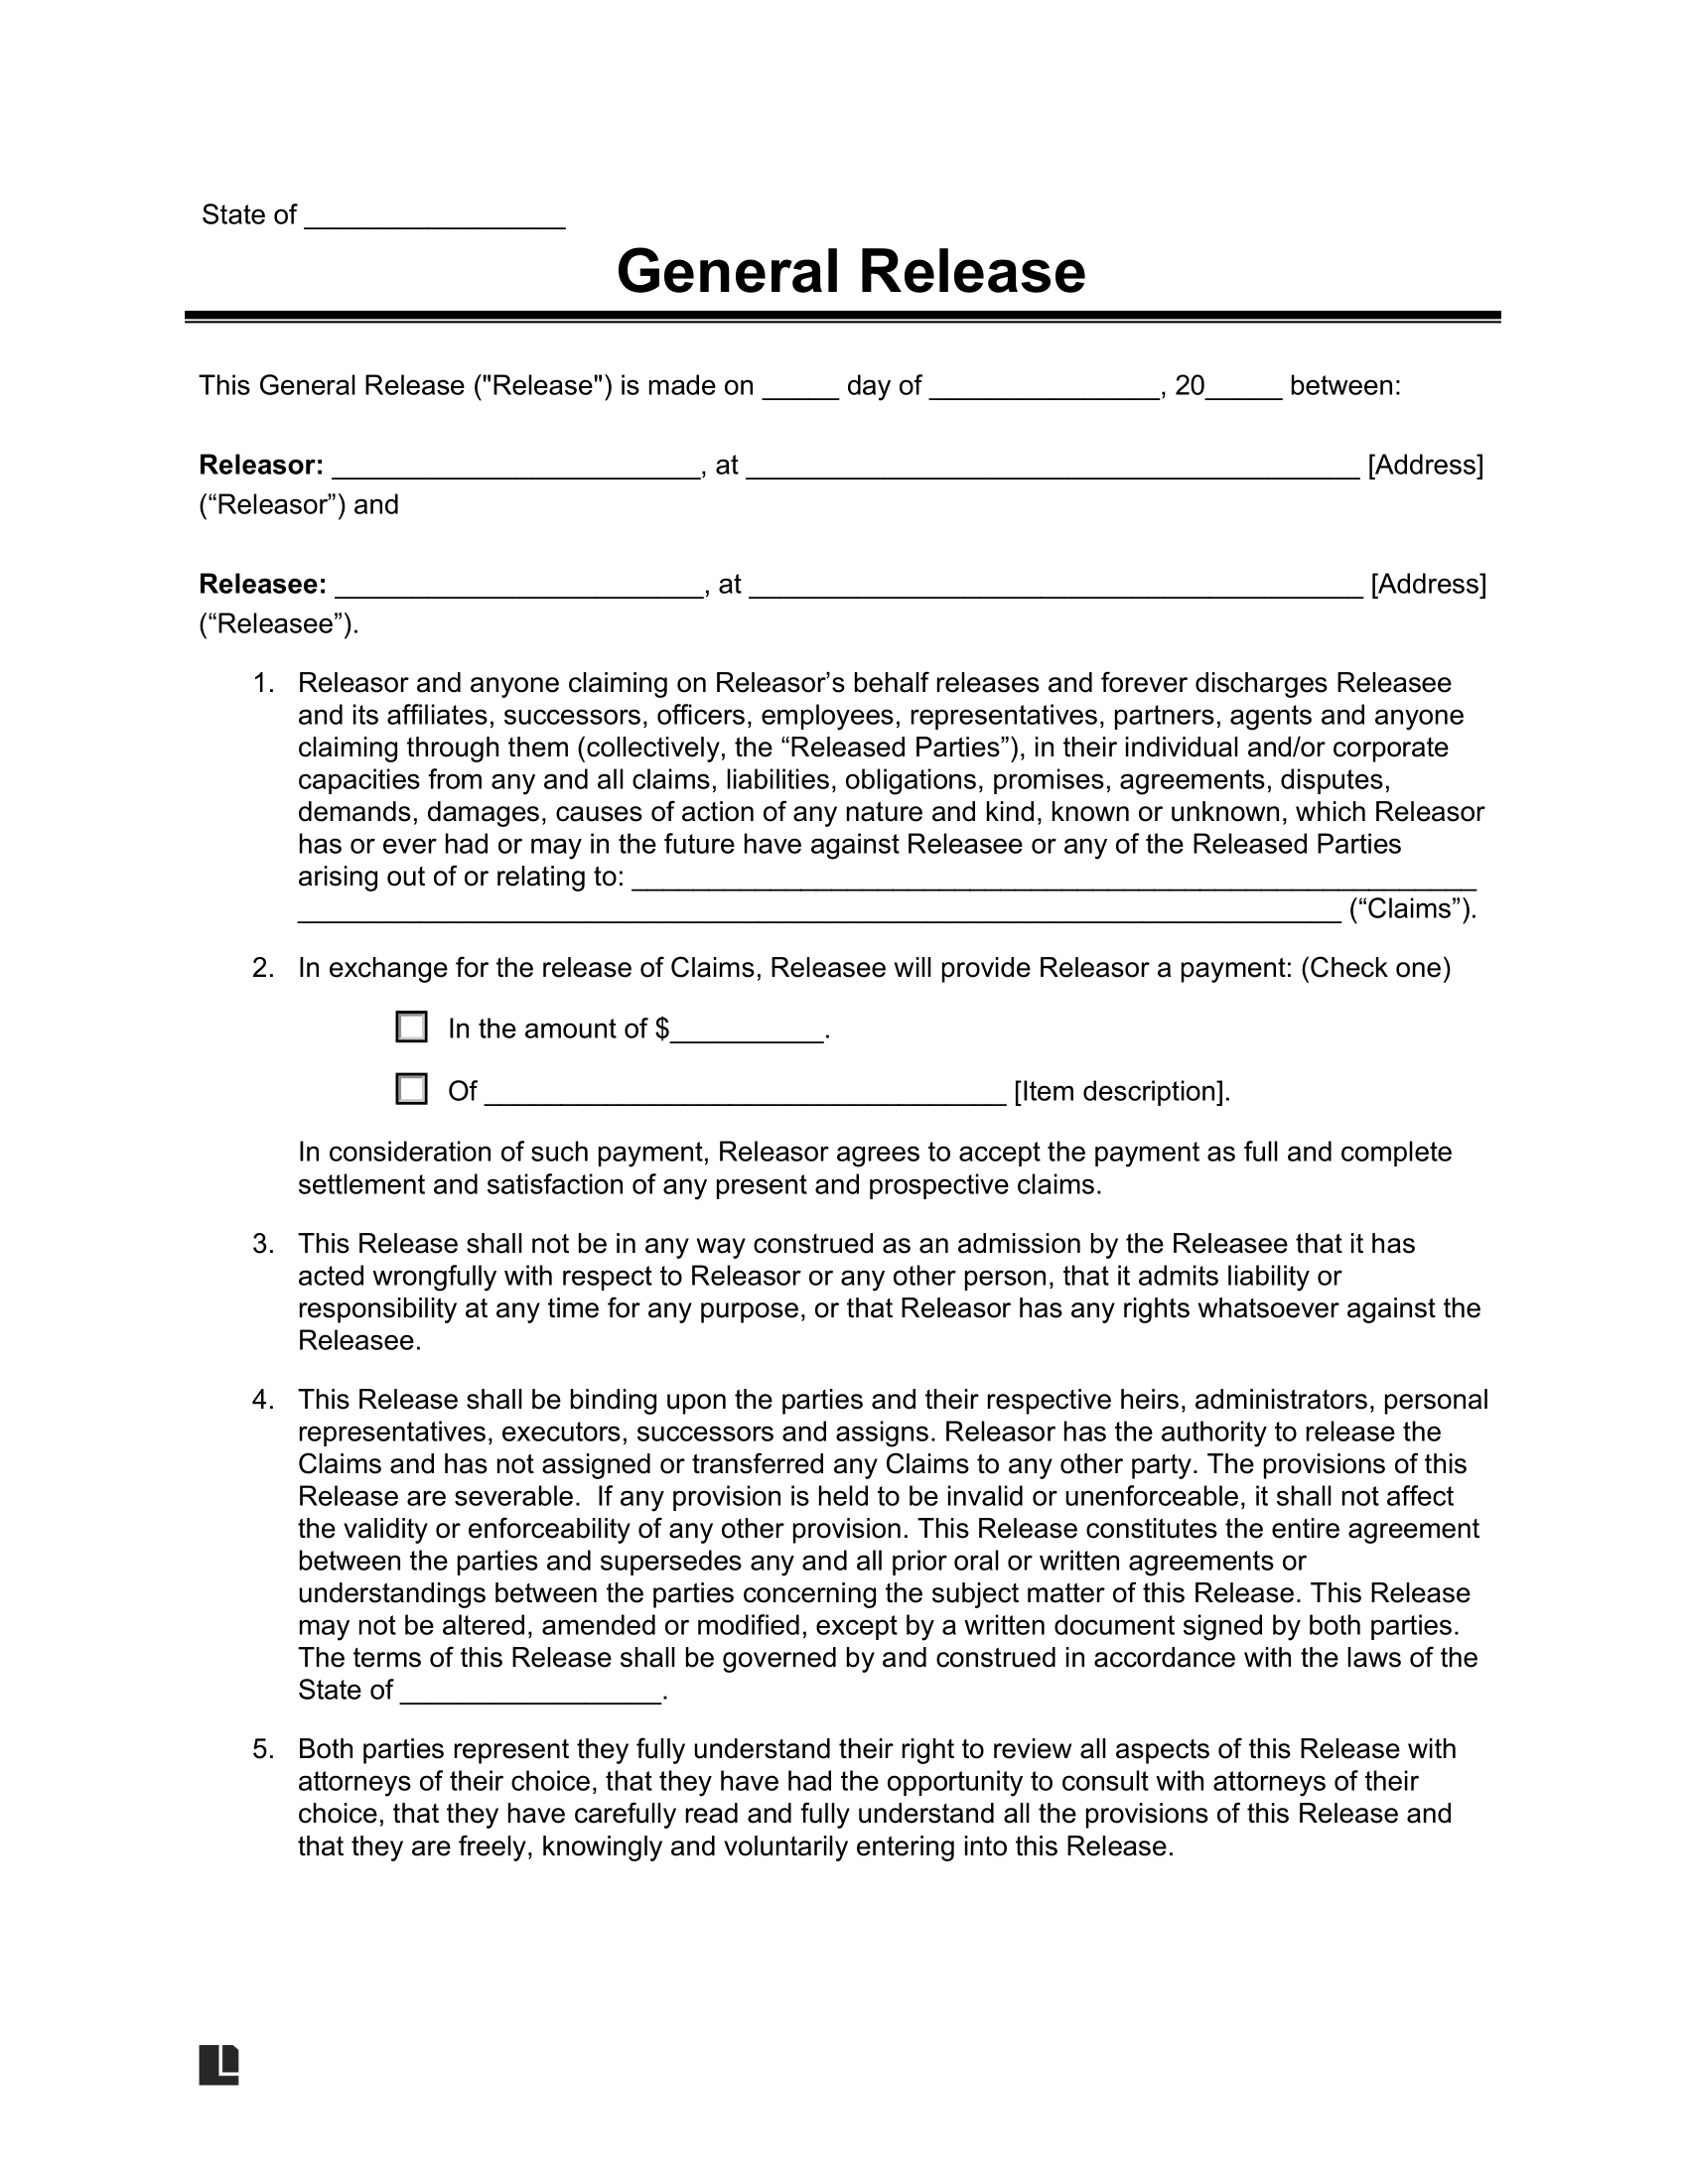 Release of Liability (Waiver Form)